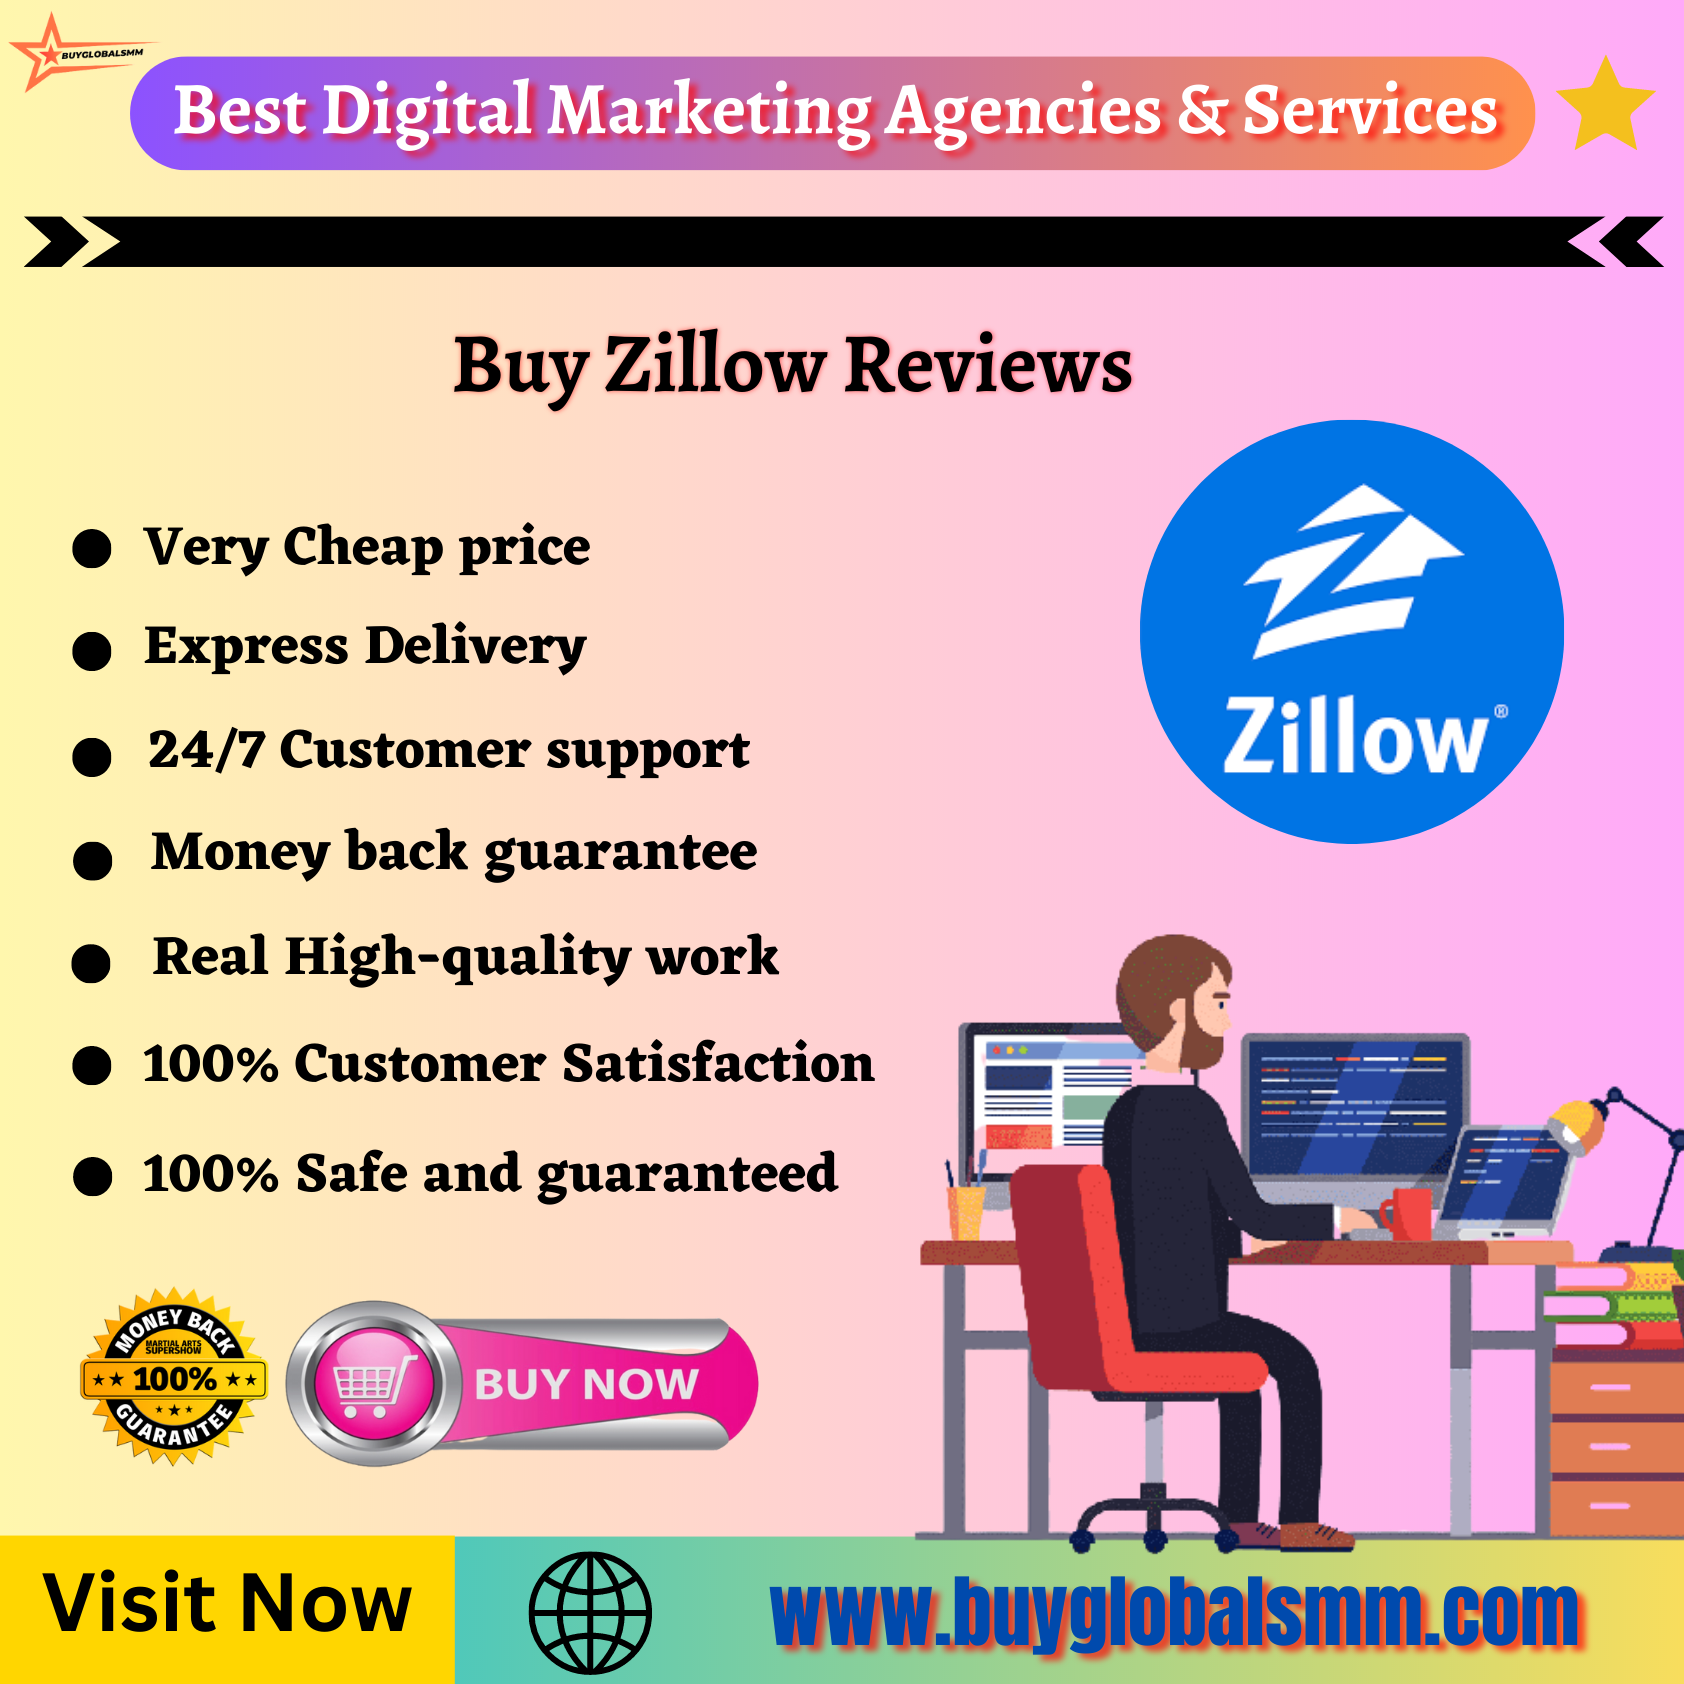 Buy Zillow Reviews-100% best, & permanent reviews...